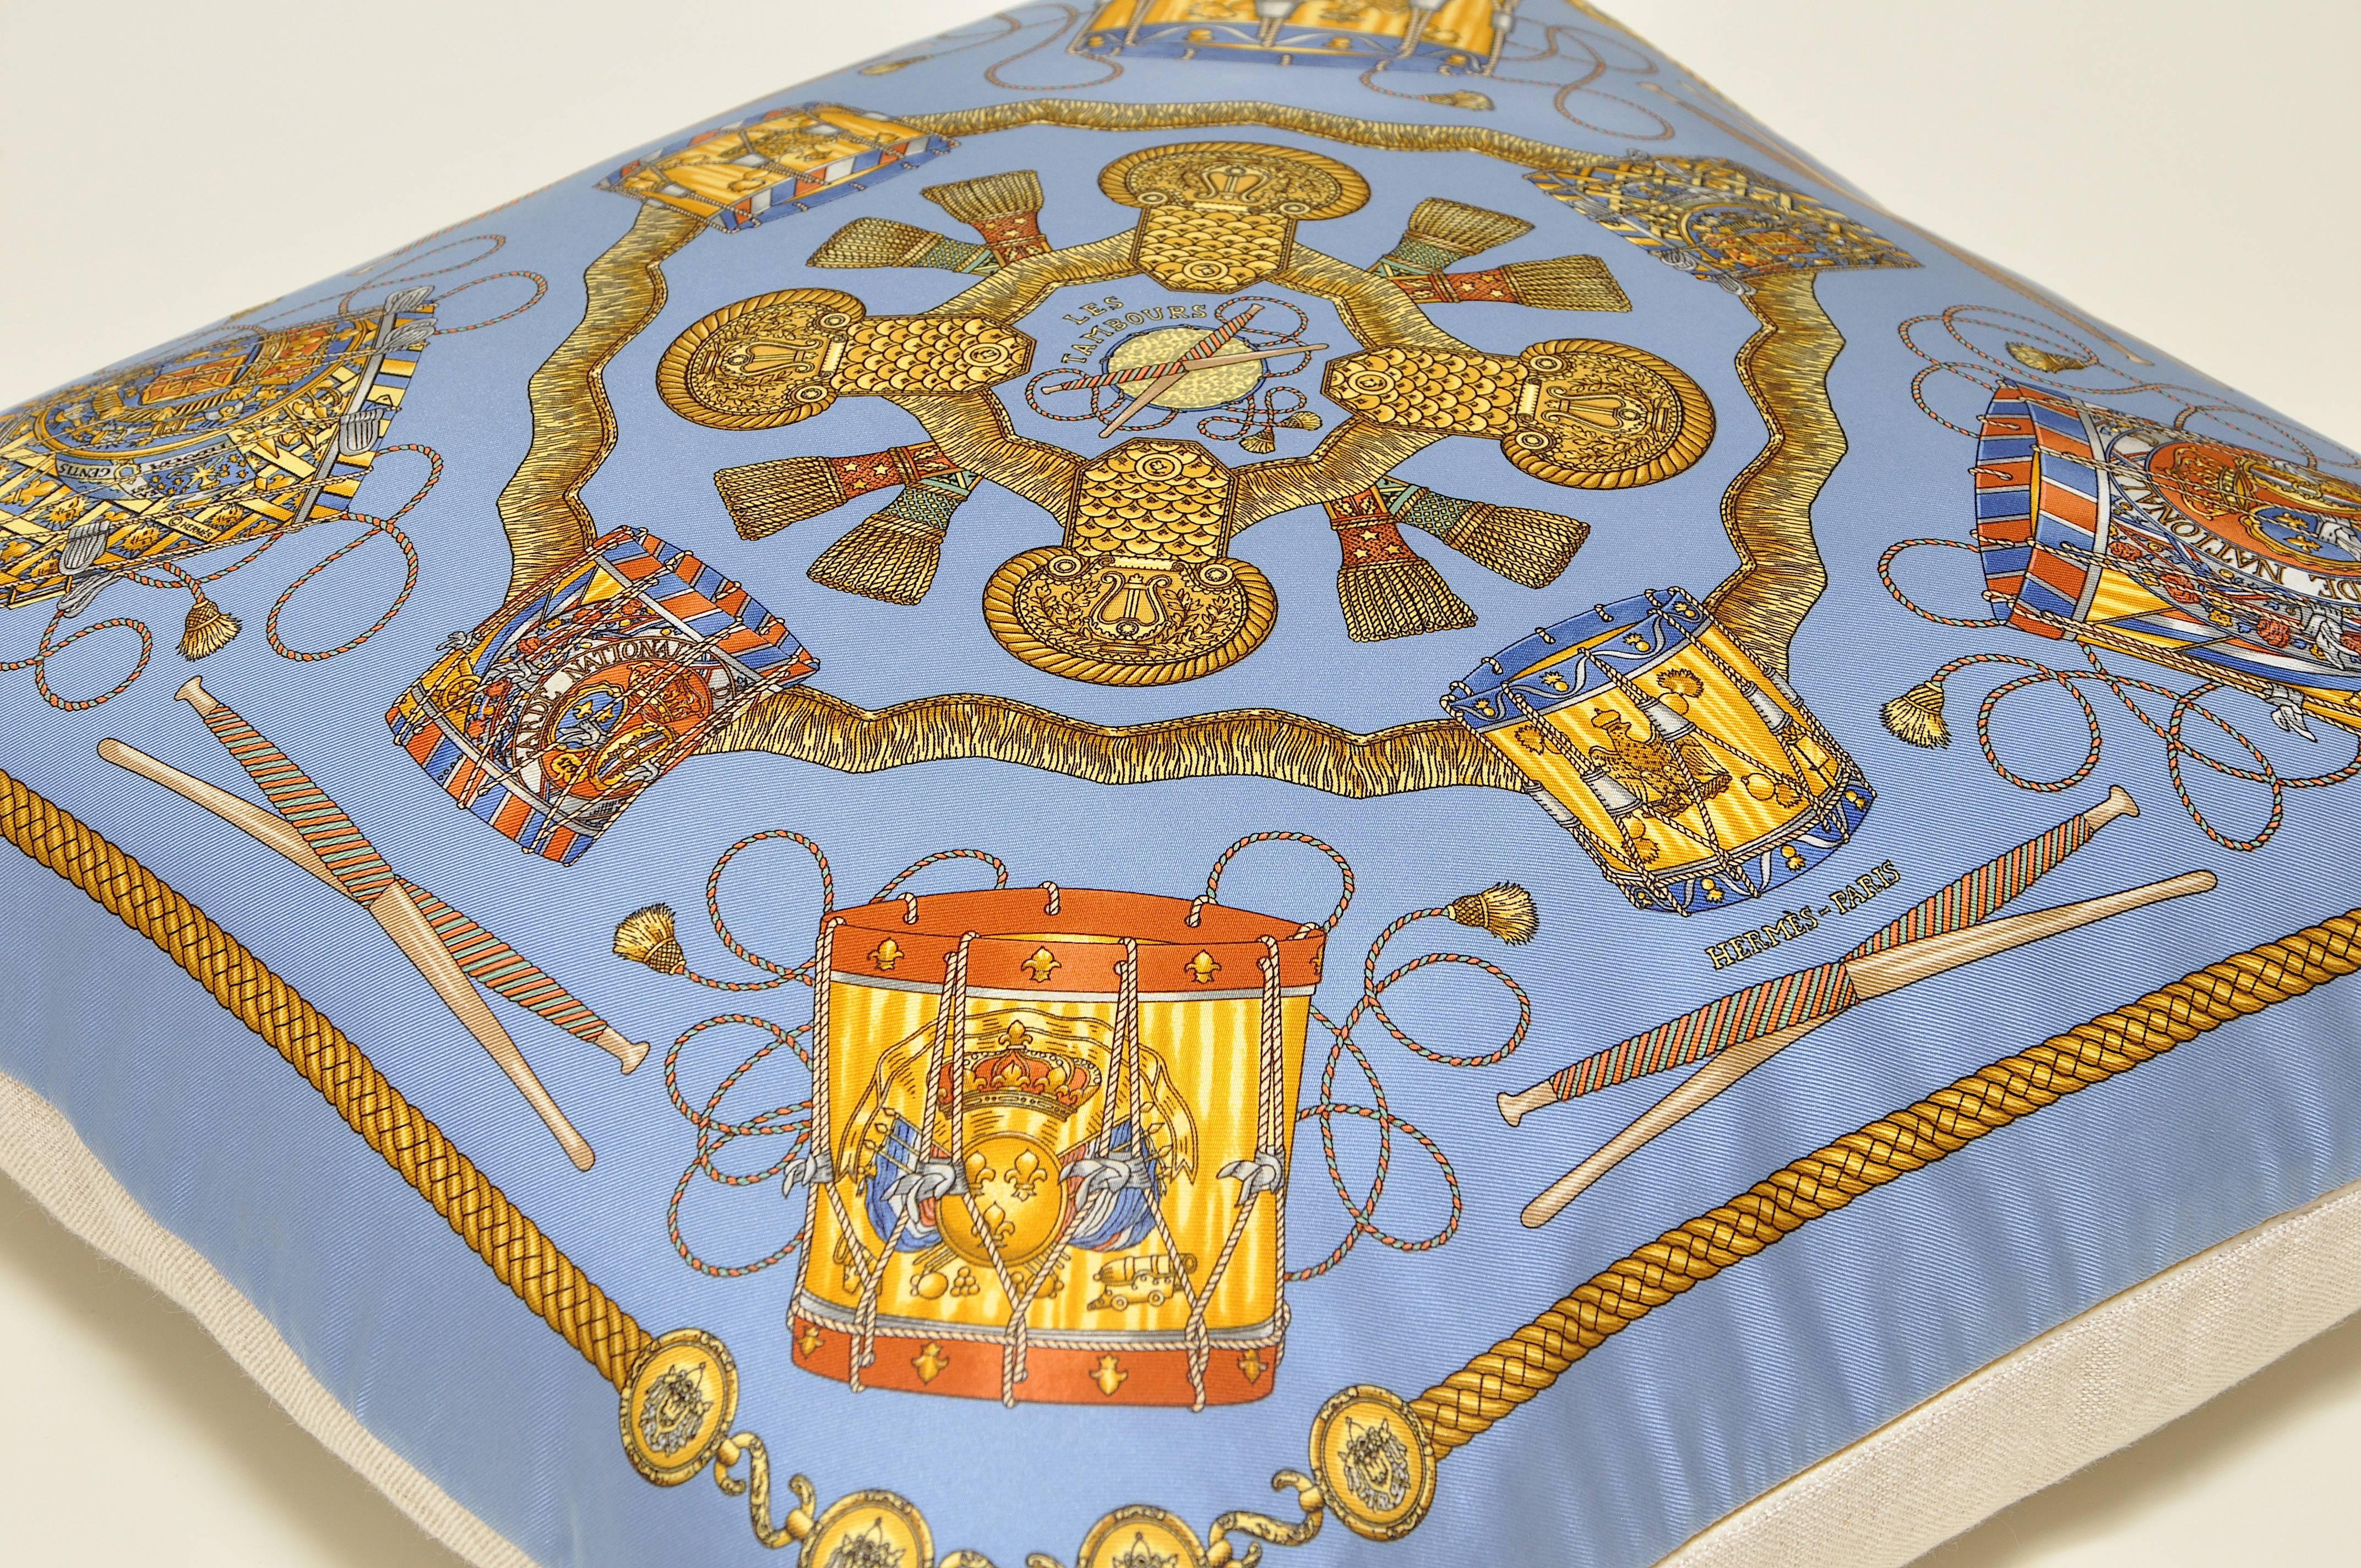 The ‘crème de la crème’ of scarves, this beauty is a one-of-a-kind custom made luxury cushion (pillow) from an exquisite vintage silk Hermes fashion scarf featuring an exquisite band design named ‘Les Tambours’ designed by Joachim Metz in 1989, in a